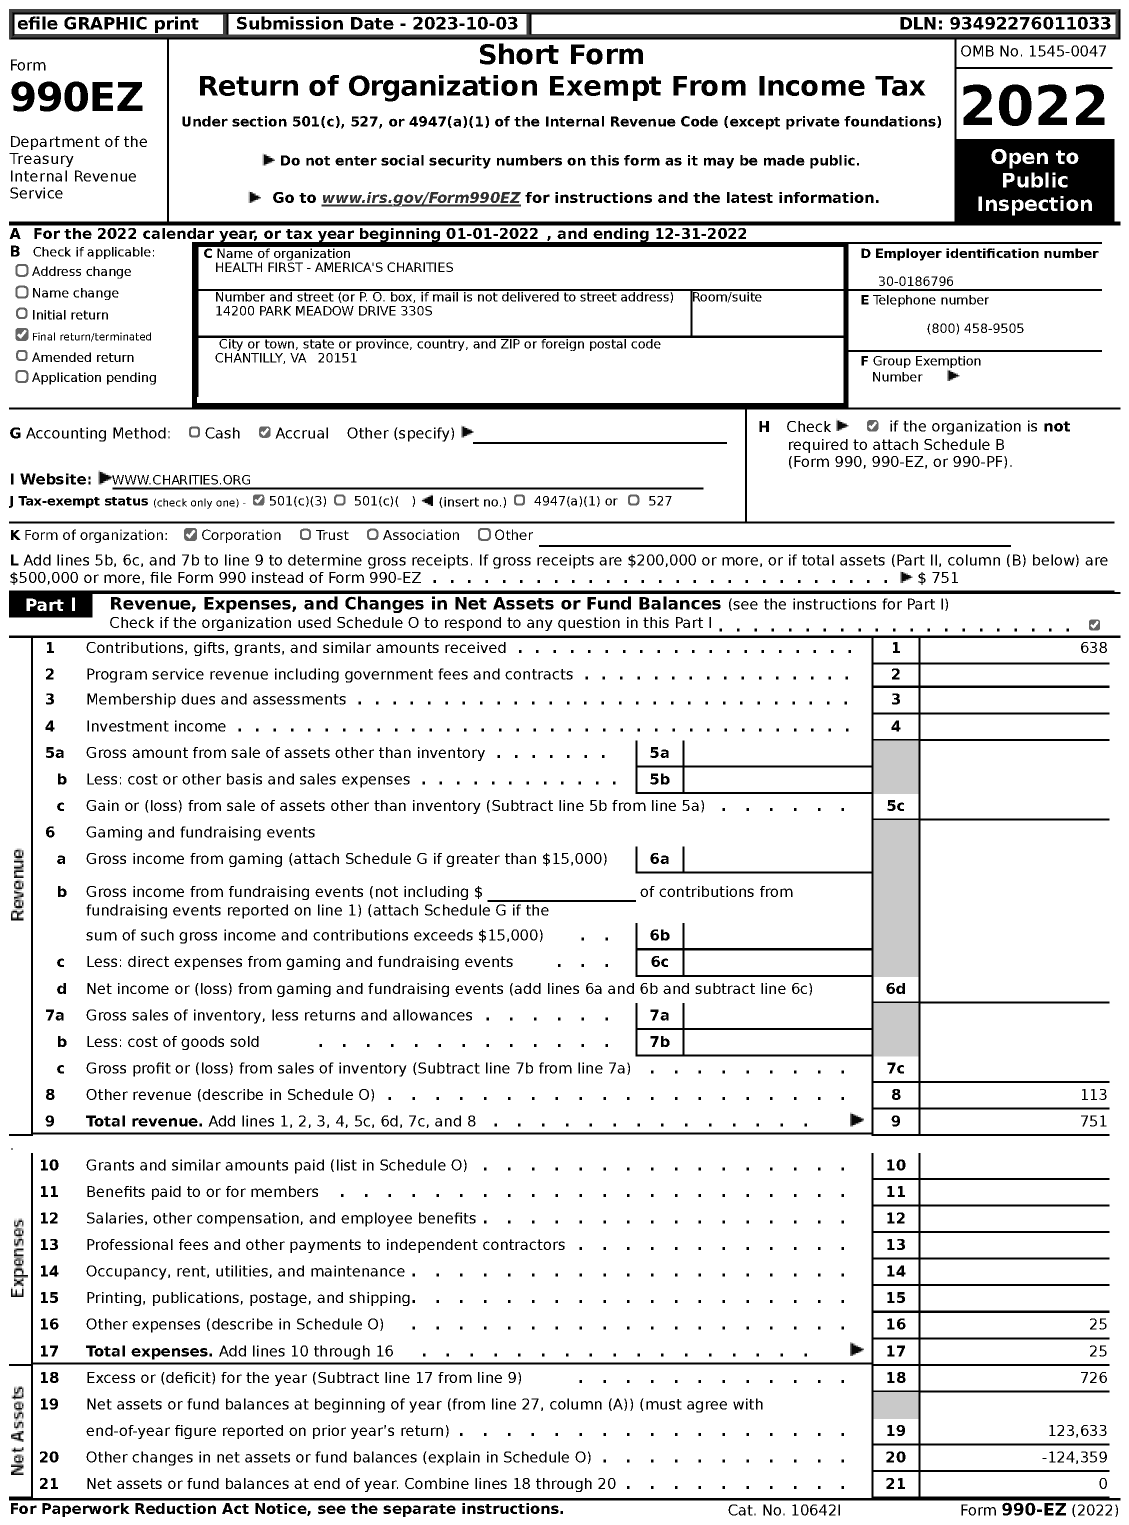 Image of first page of 2022 Form 990EZ for Health First - America's Charities